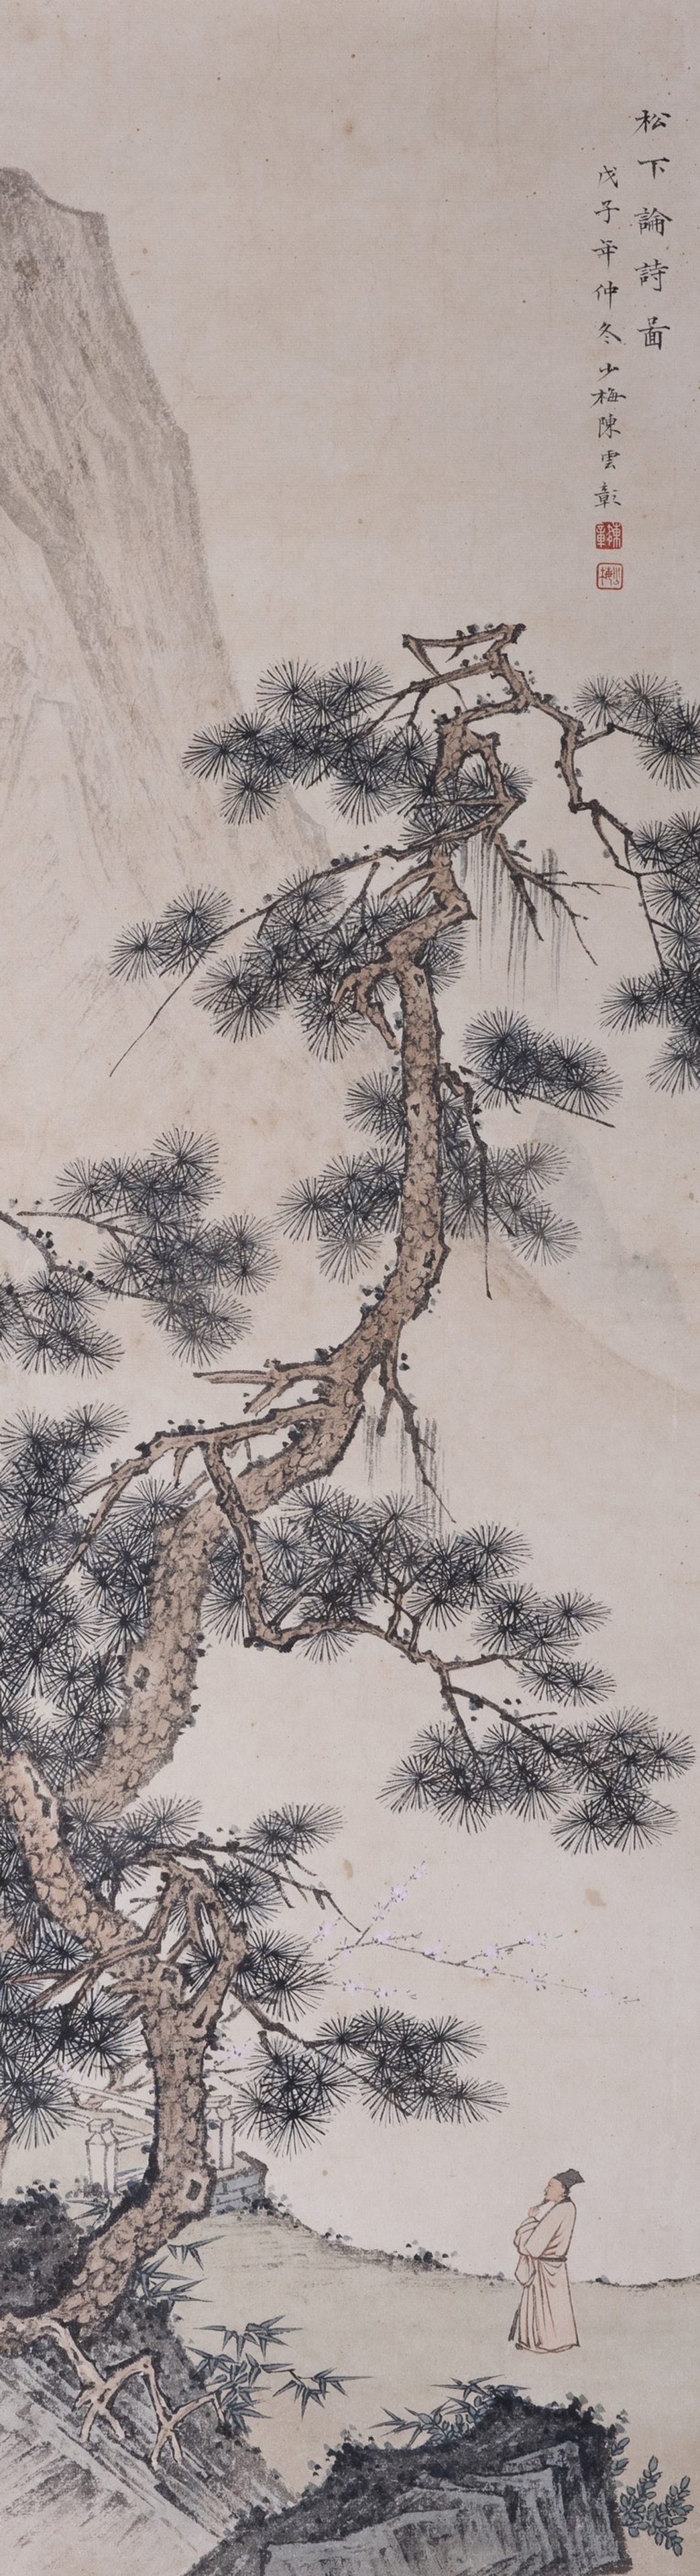 Chen Shao Mei (Attributed to, 1909-1954), Pine Tree - Image 2 of 3